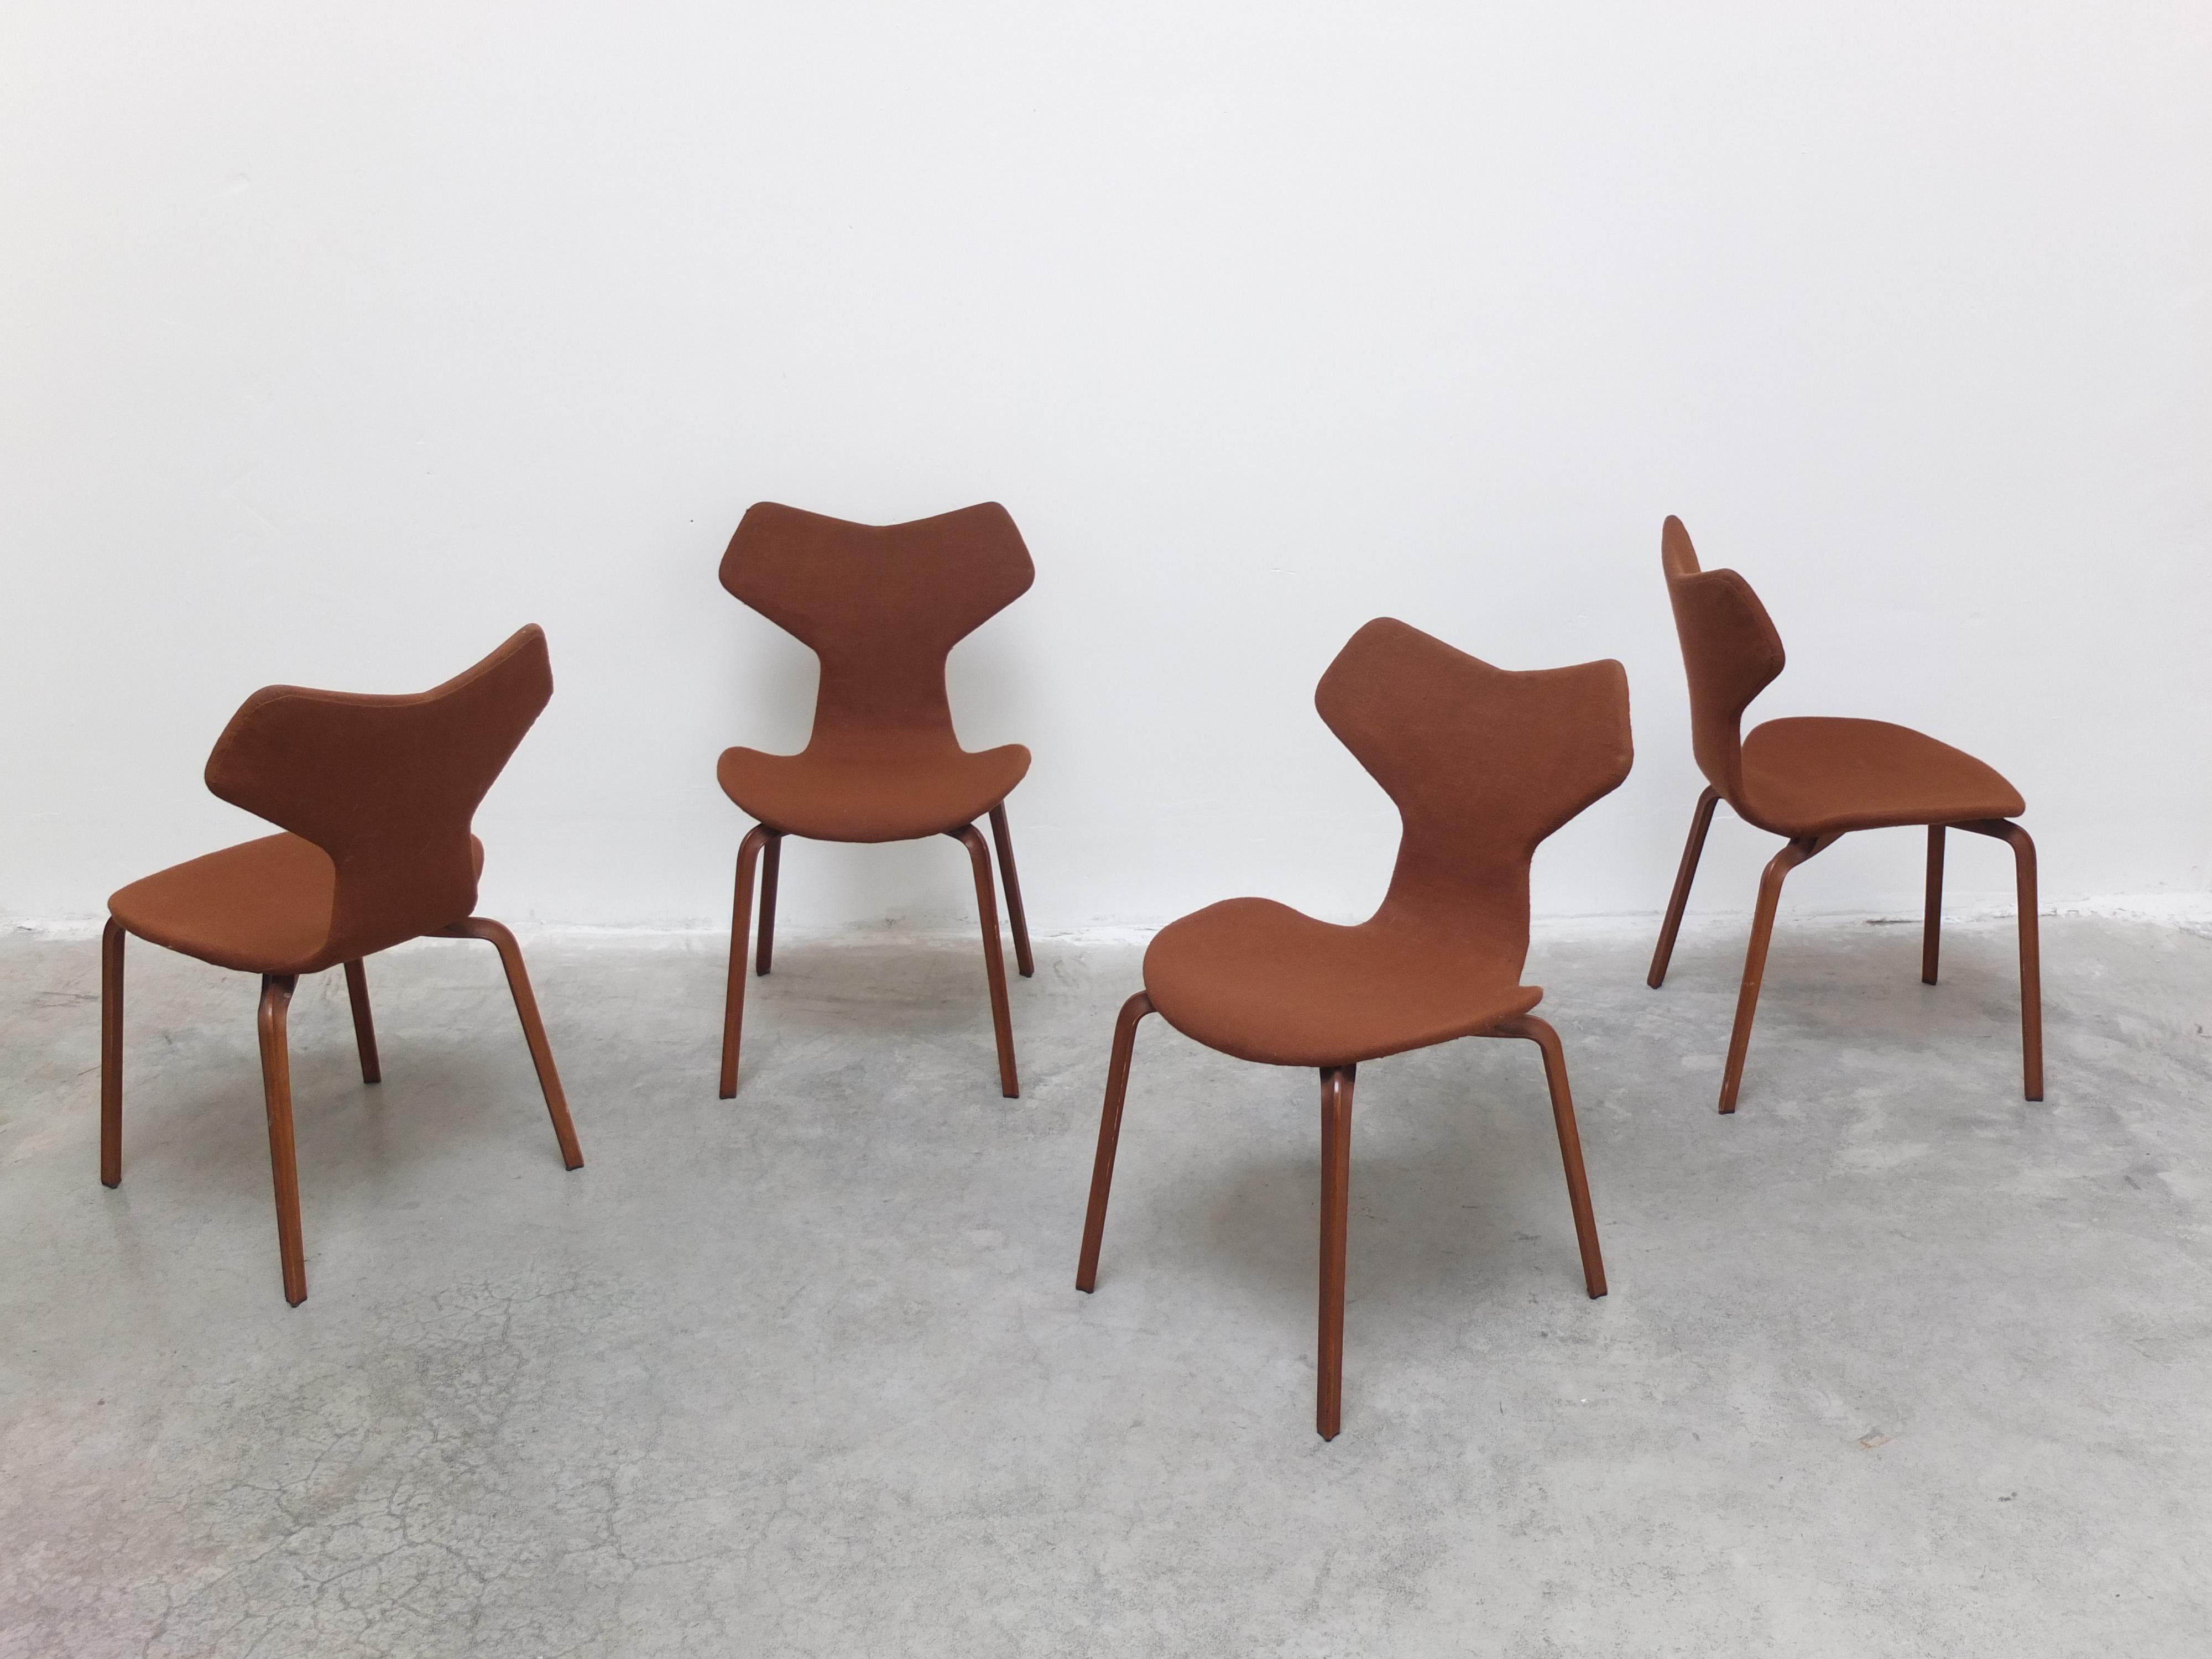 Set of 4 1st Edition 'Grand Prix' Chairs by Arne Jacobsen for Fritz Hansen, 1957 For Sale 6